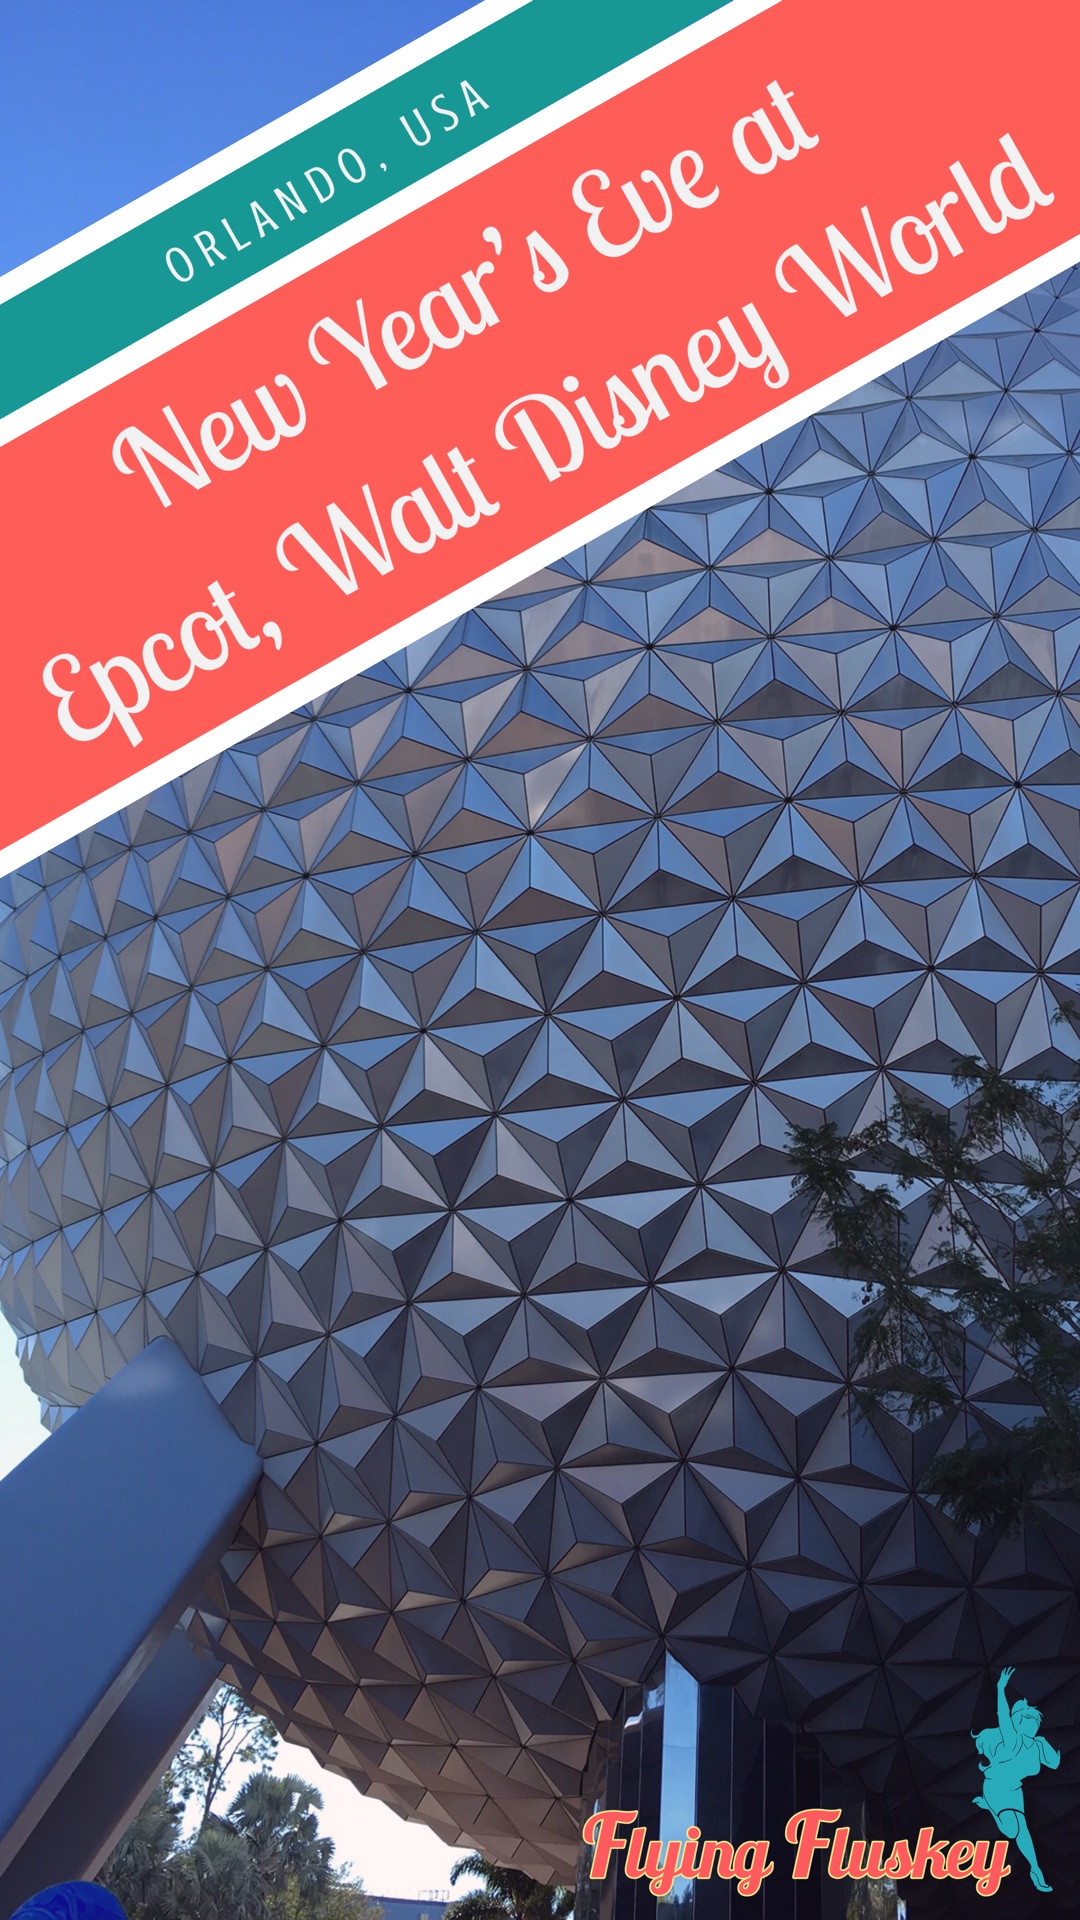 New Year's Eve at Epot may not be the most obvious way to start the New Year but it is the most wonderful day. New Year's Eve at Epcot / New Year's Eve at WDW / Disney World New Year's Eve / NYE at Epcot / New Years Eve Orlando #wdw #epcot